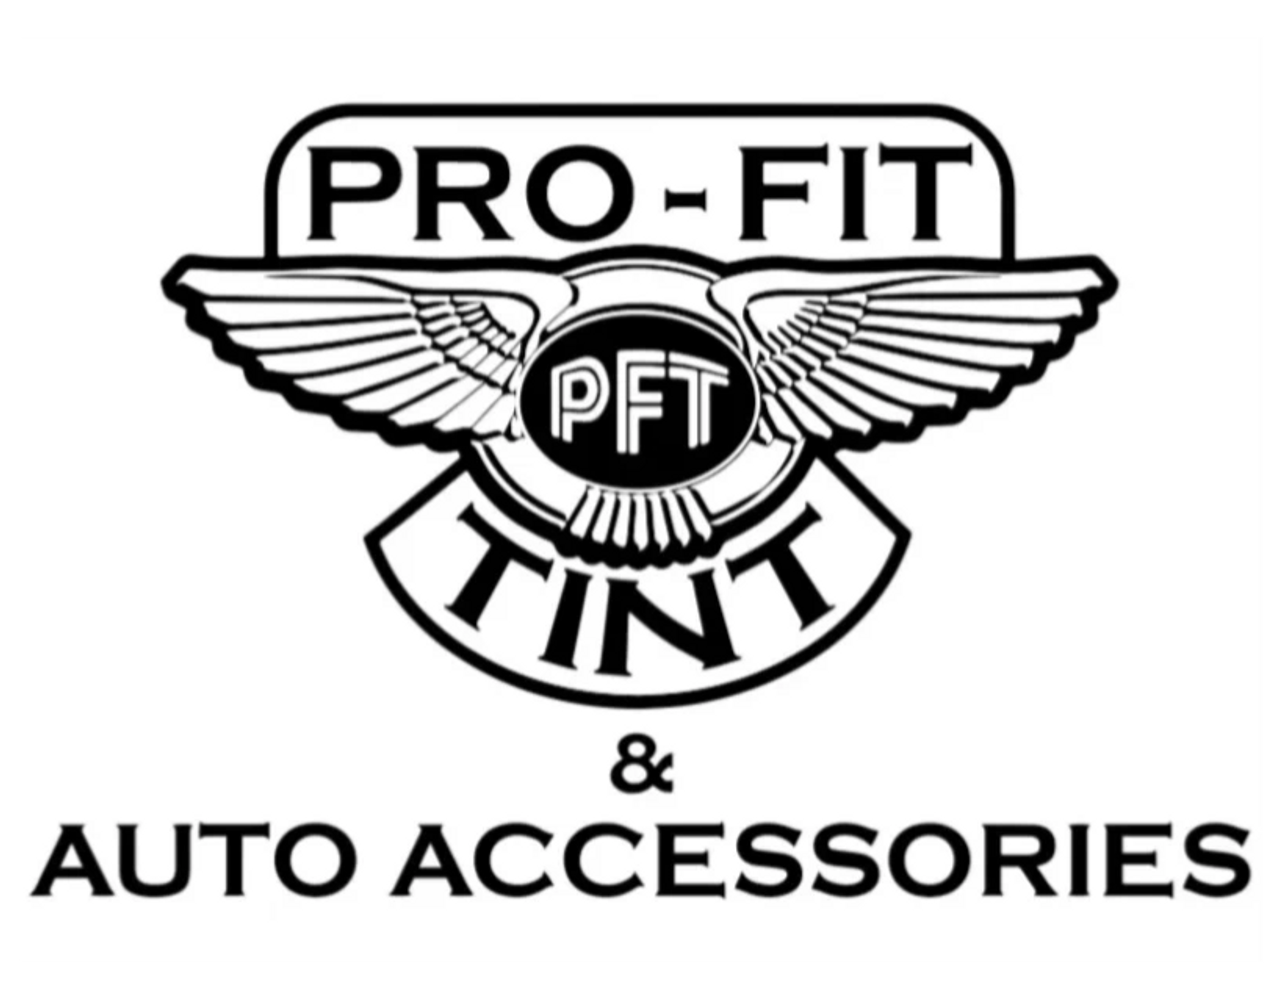 Pro-Fit Tint - Auto Accessories, Tint, Paint Protection Film